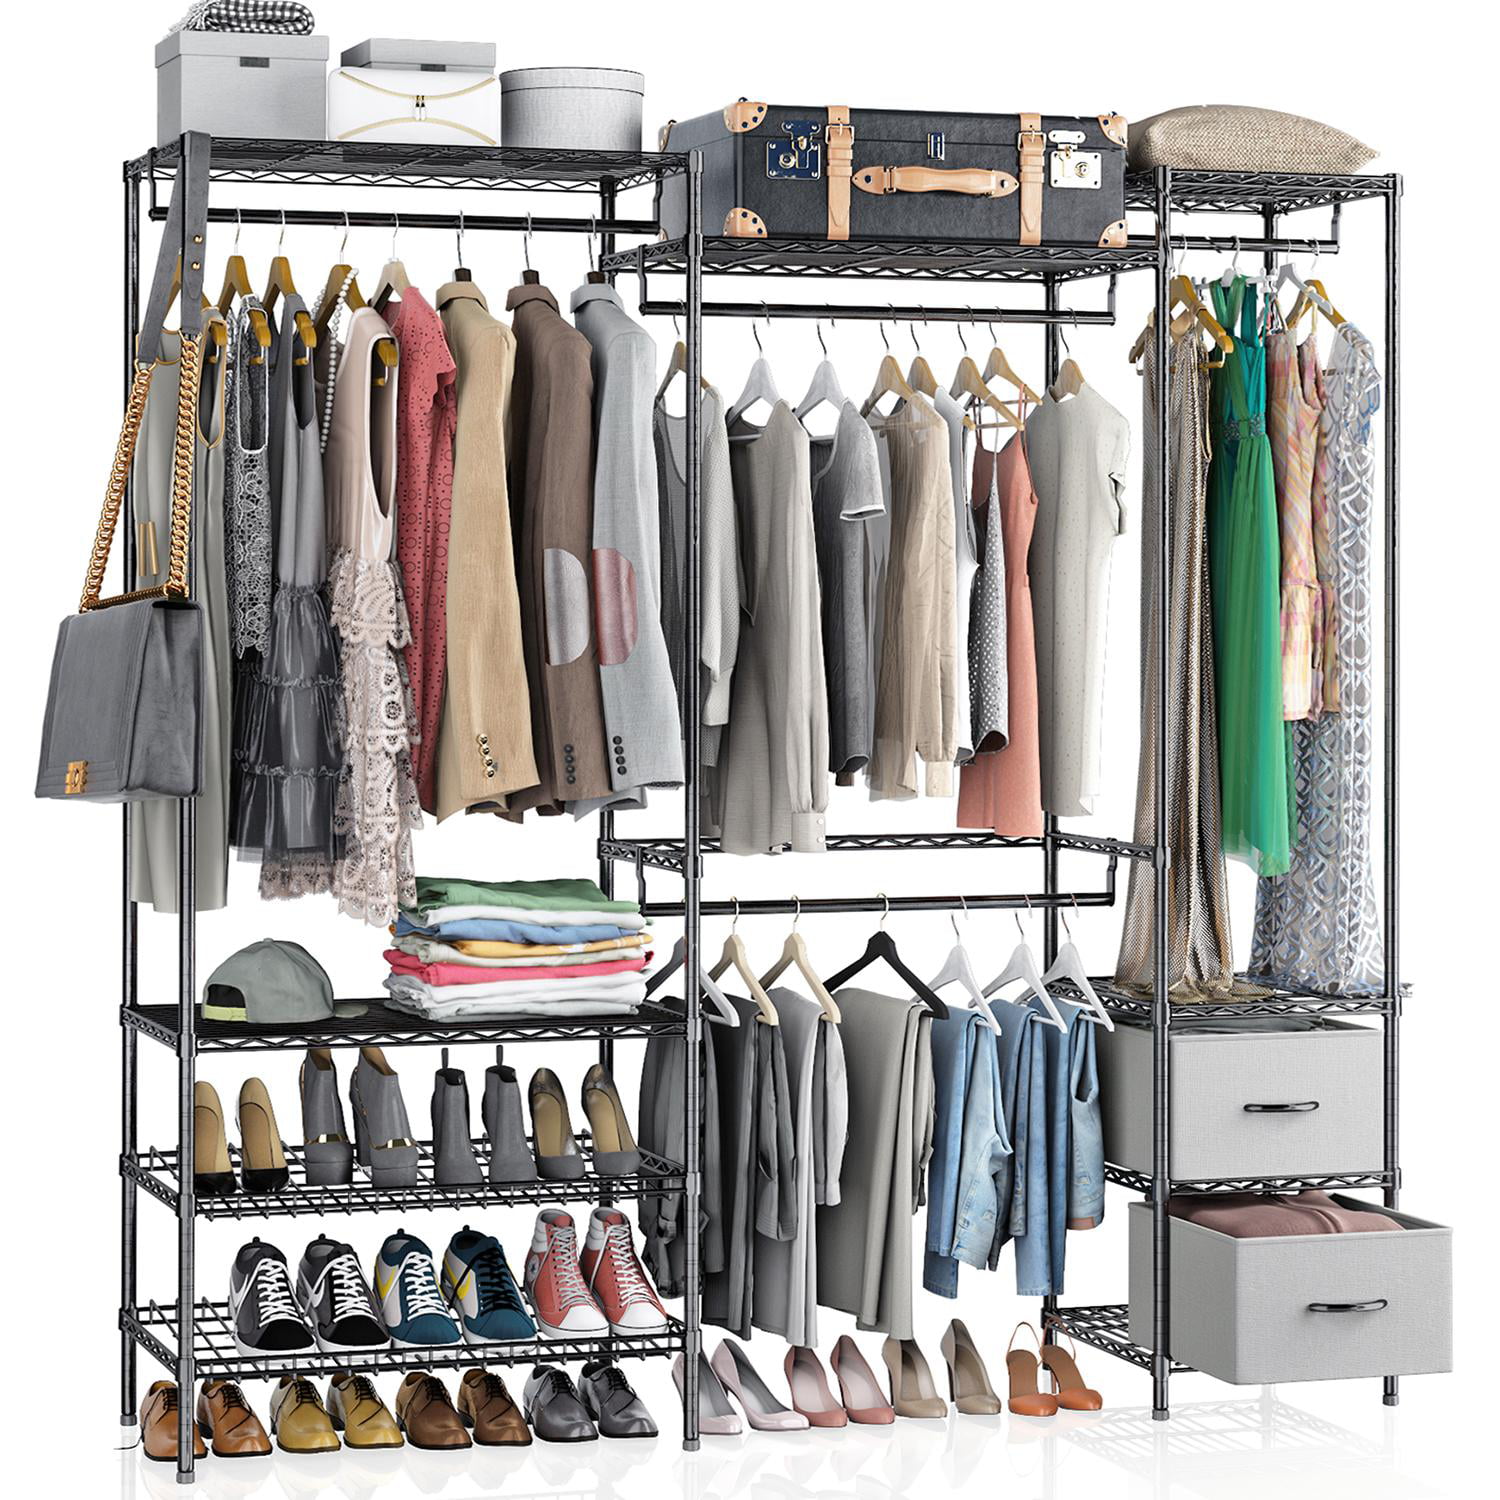 VIPEK 5 Tiers Wire Garment Rack Heavy Duty Clothes Rack with 2 Fabric ...